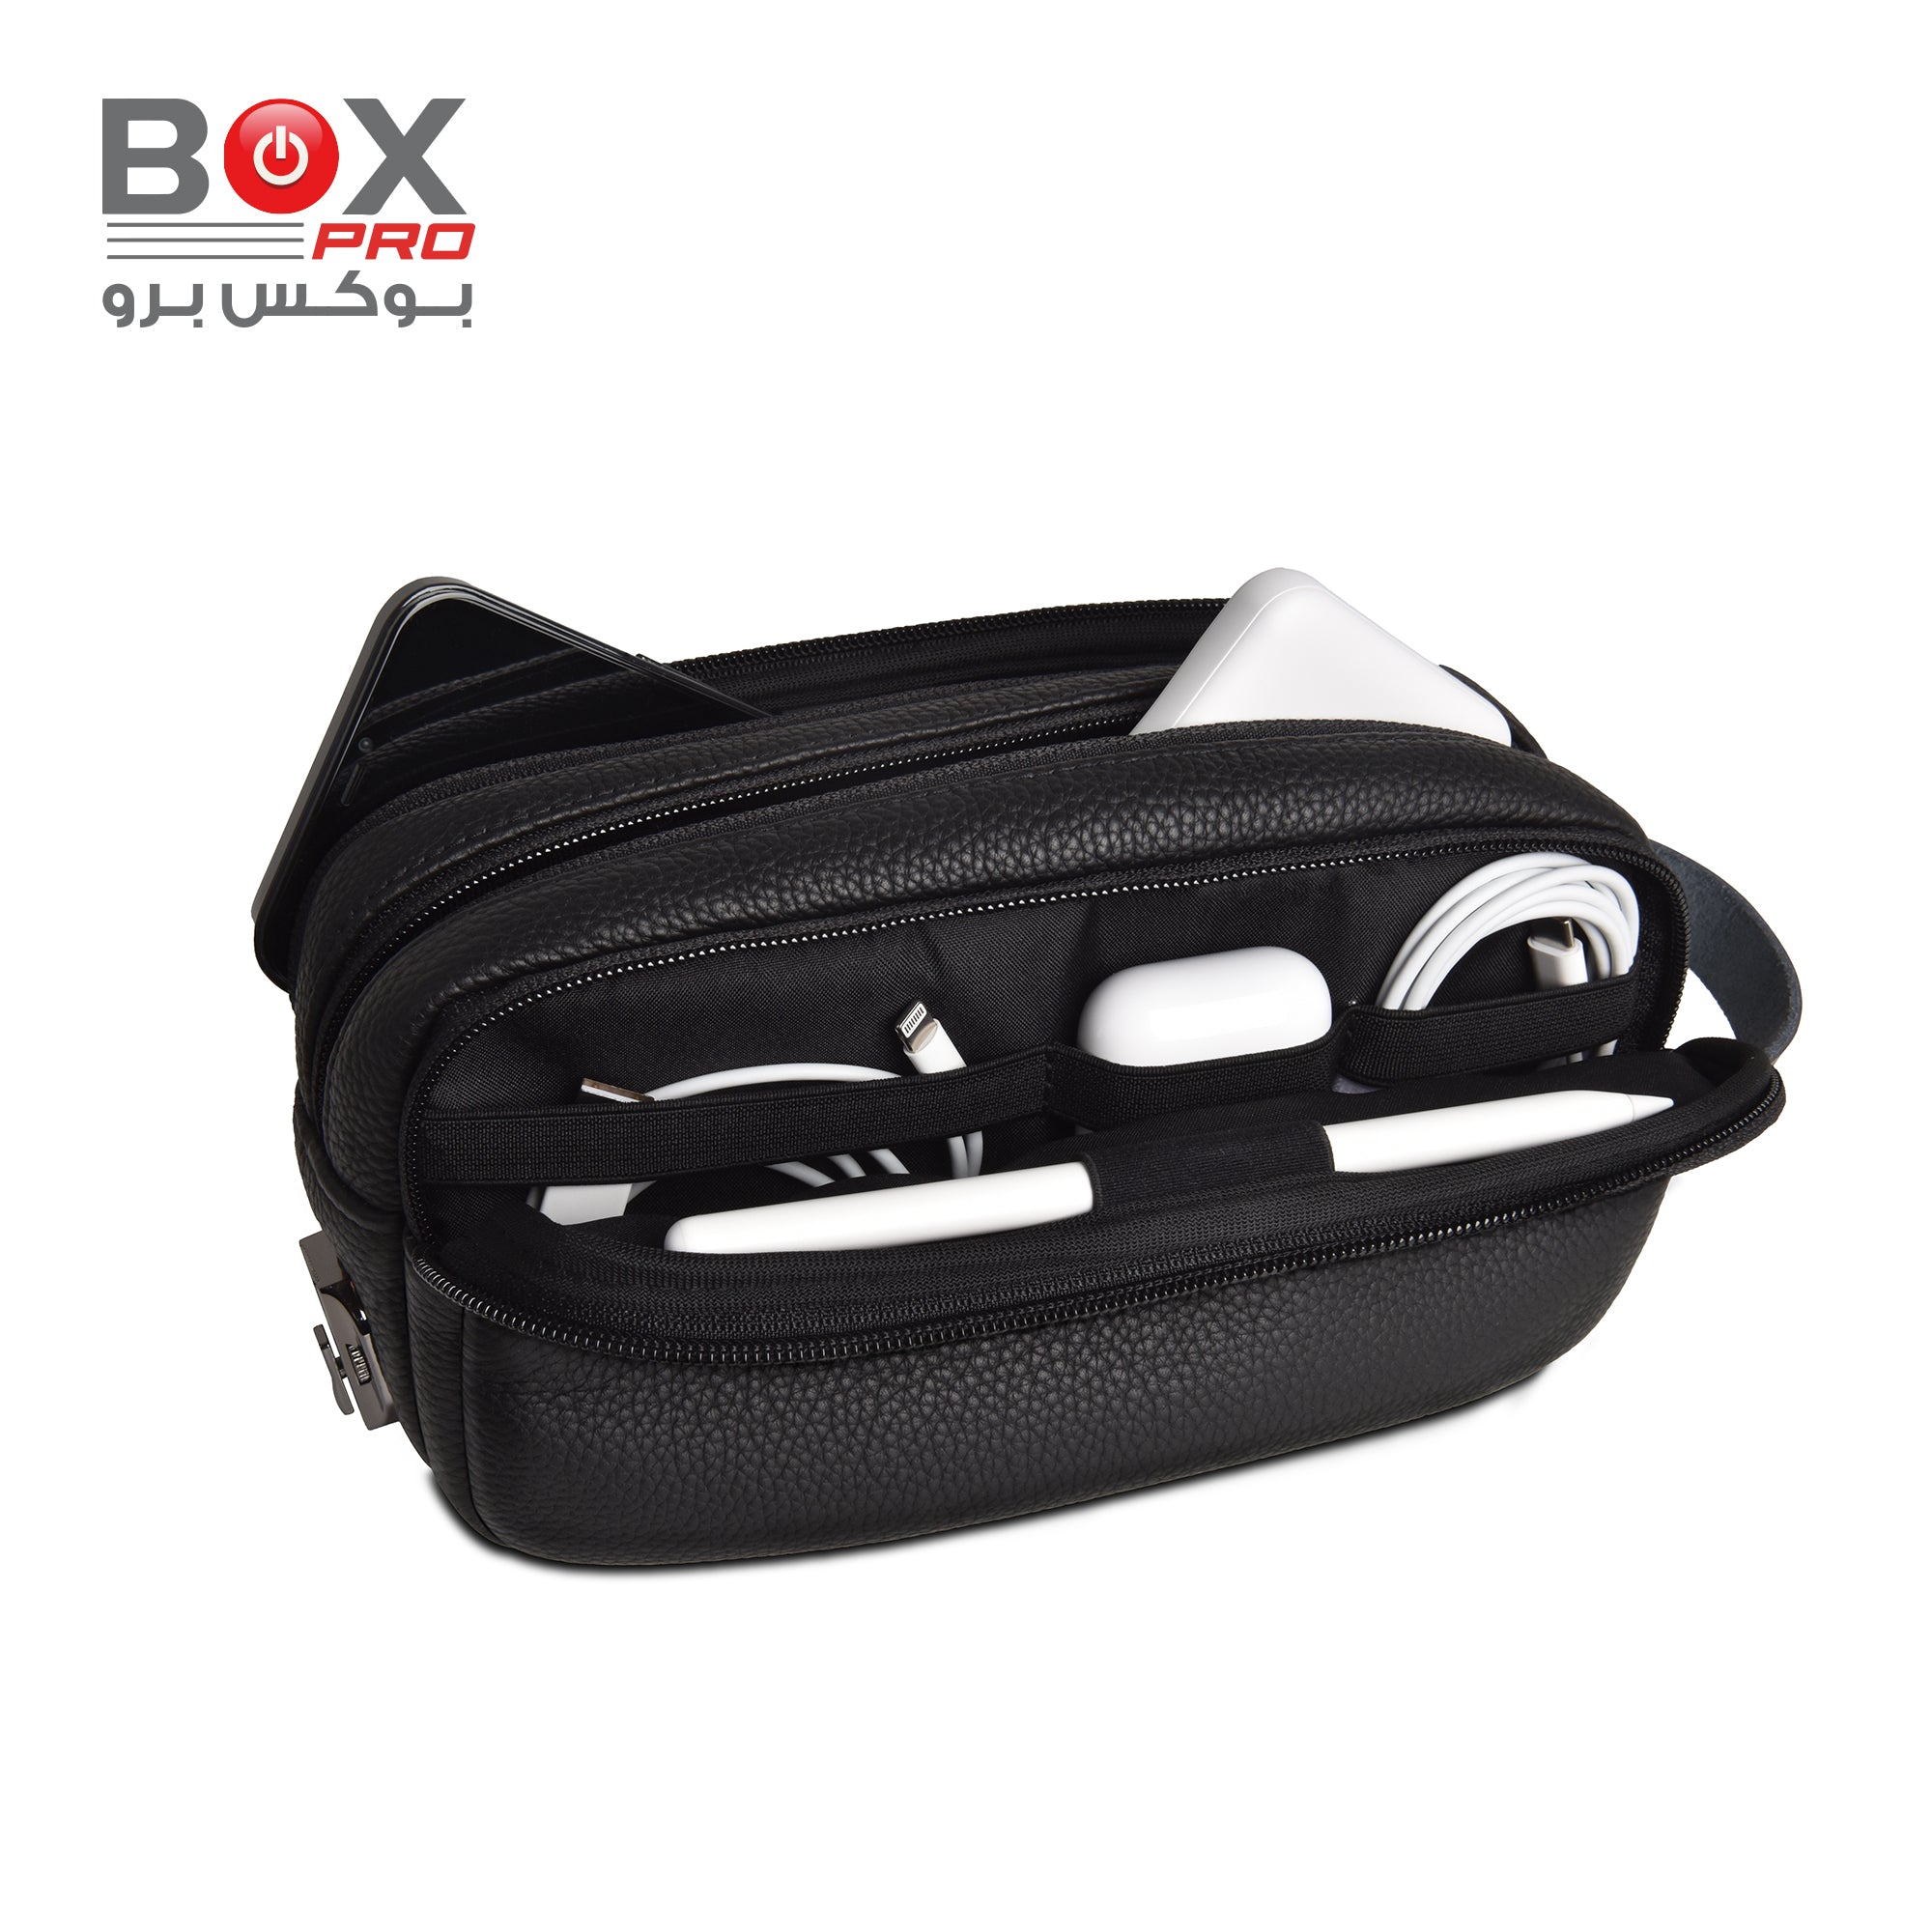 Box Pro Travel package 14 products